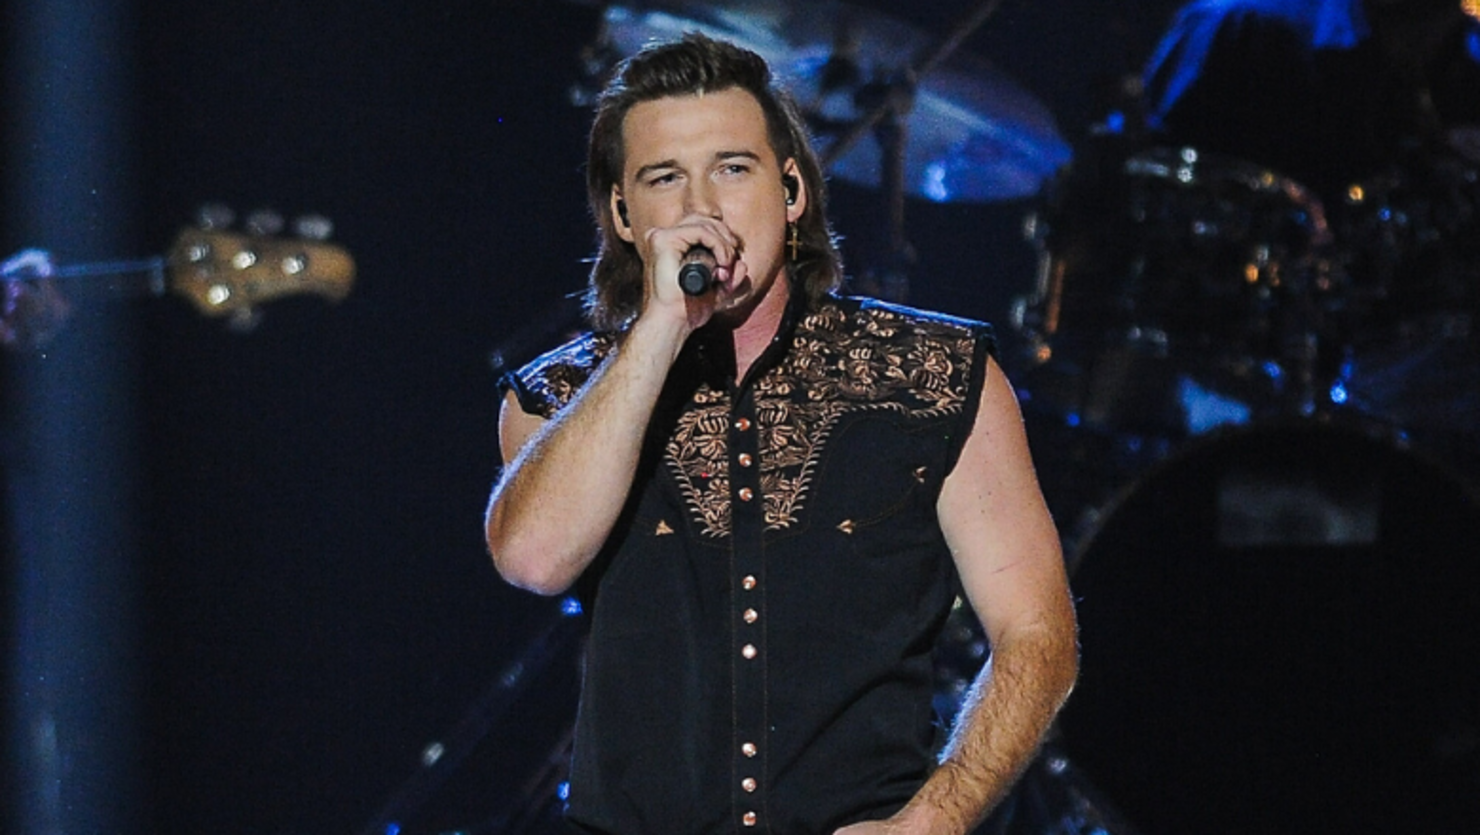 Morgan Wallen's Love Has Limits In New Song, 'More Than My Hometown' 